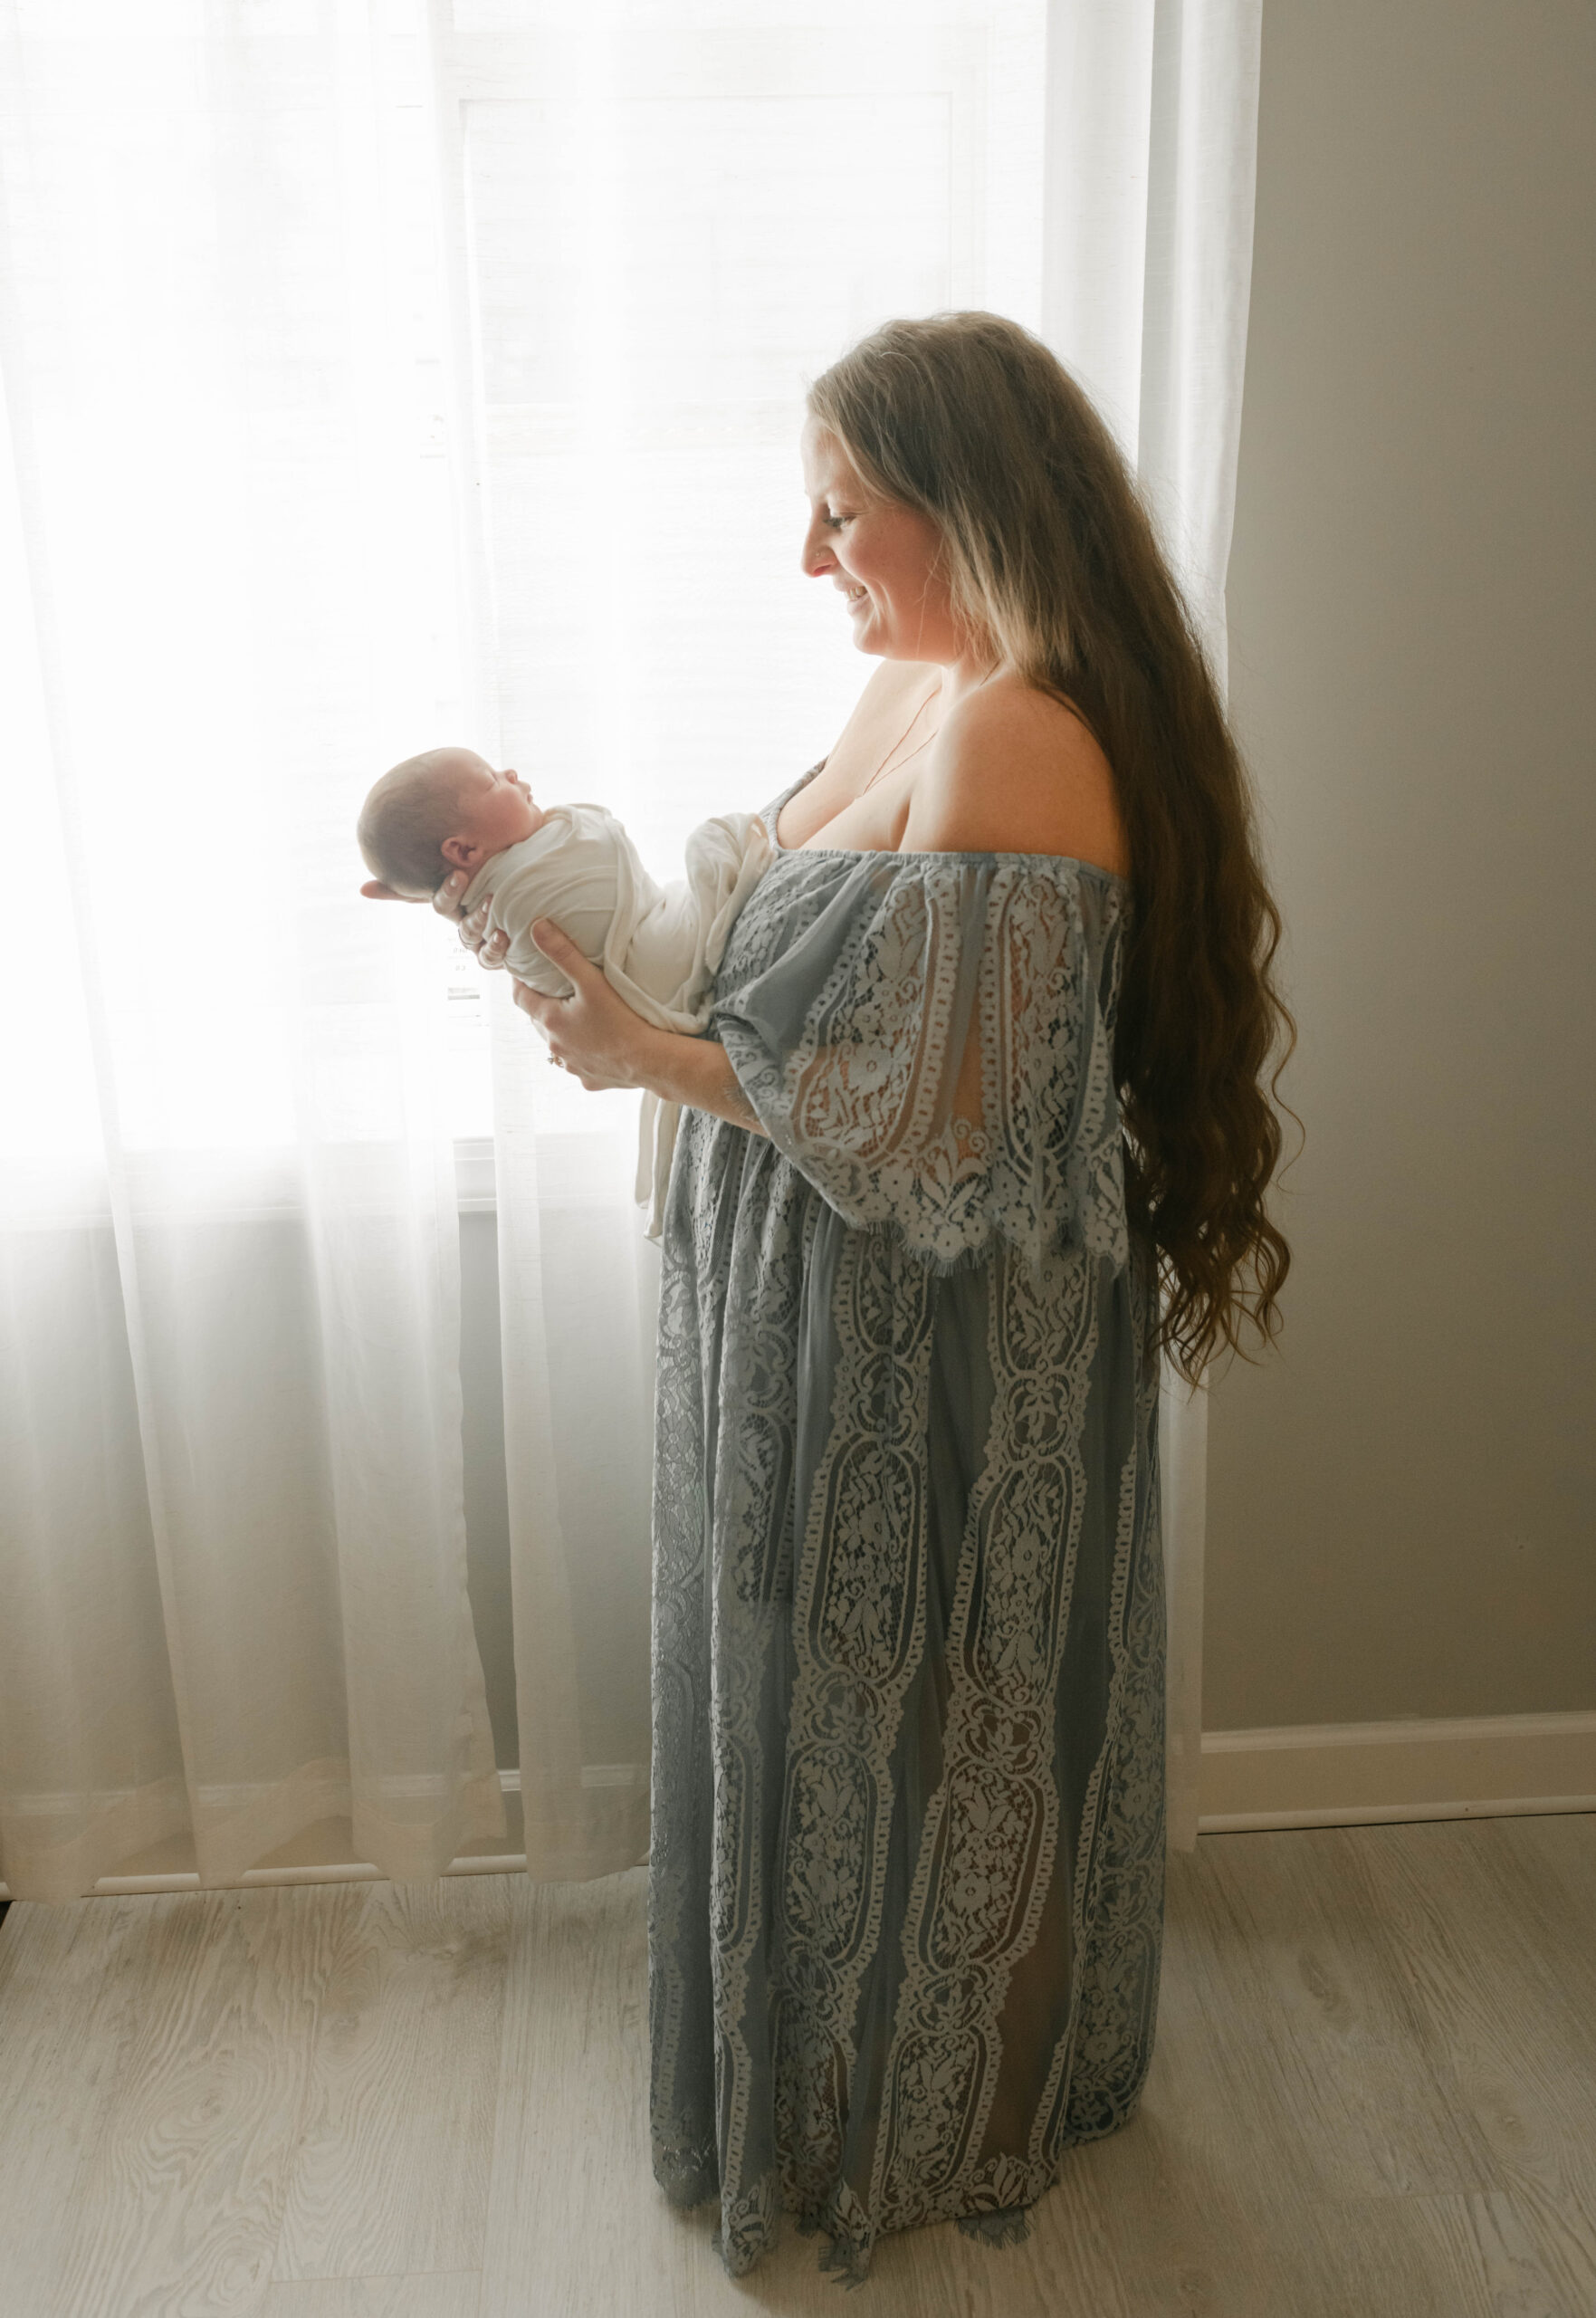 A new mom wearing a long blue dress looks down at her sleeping newborn baby in front of a window in her hands